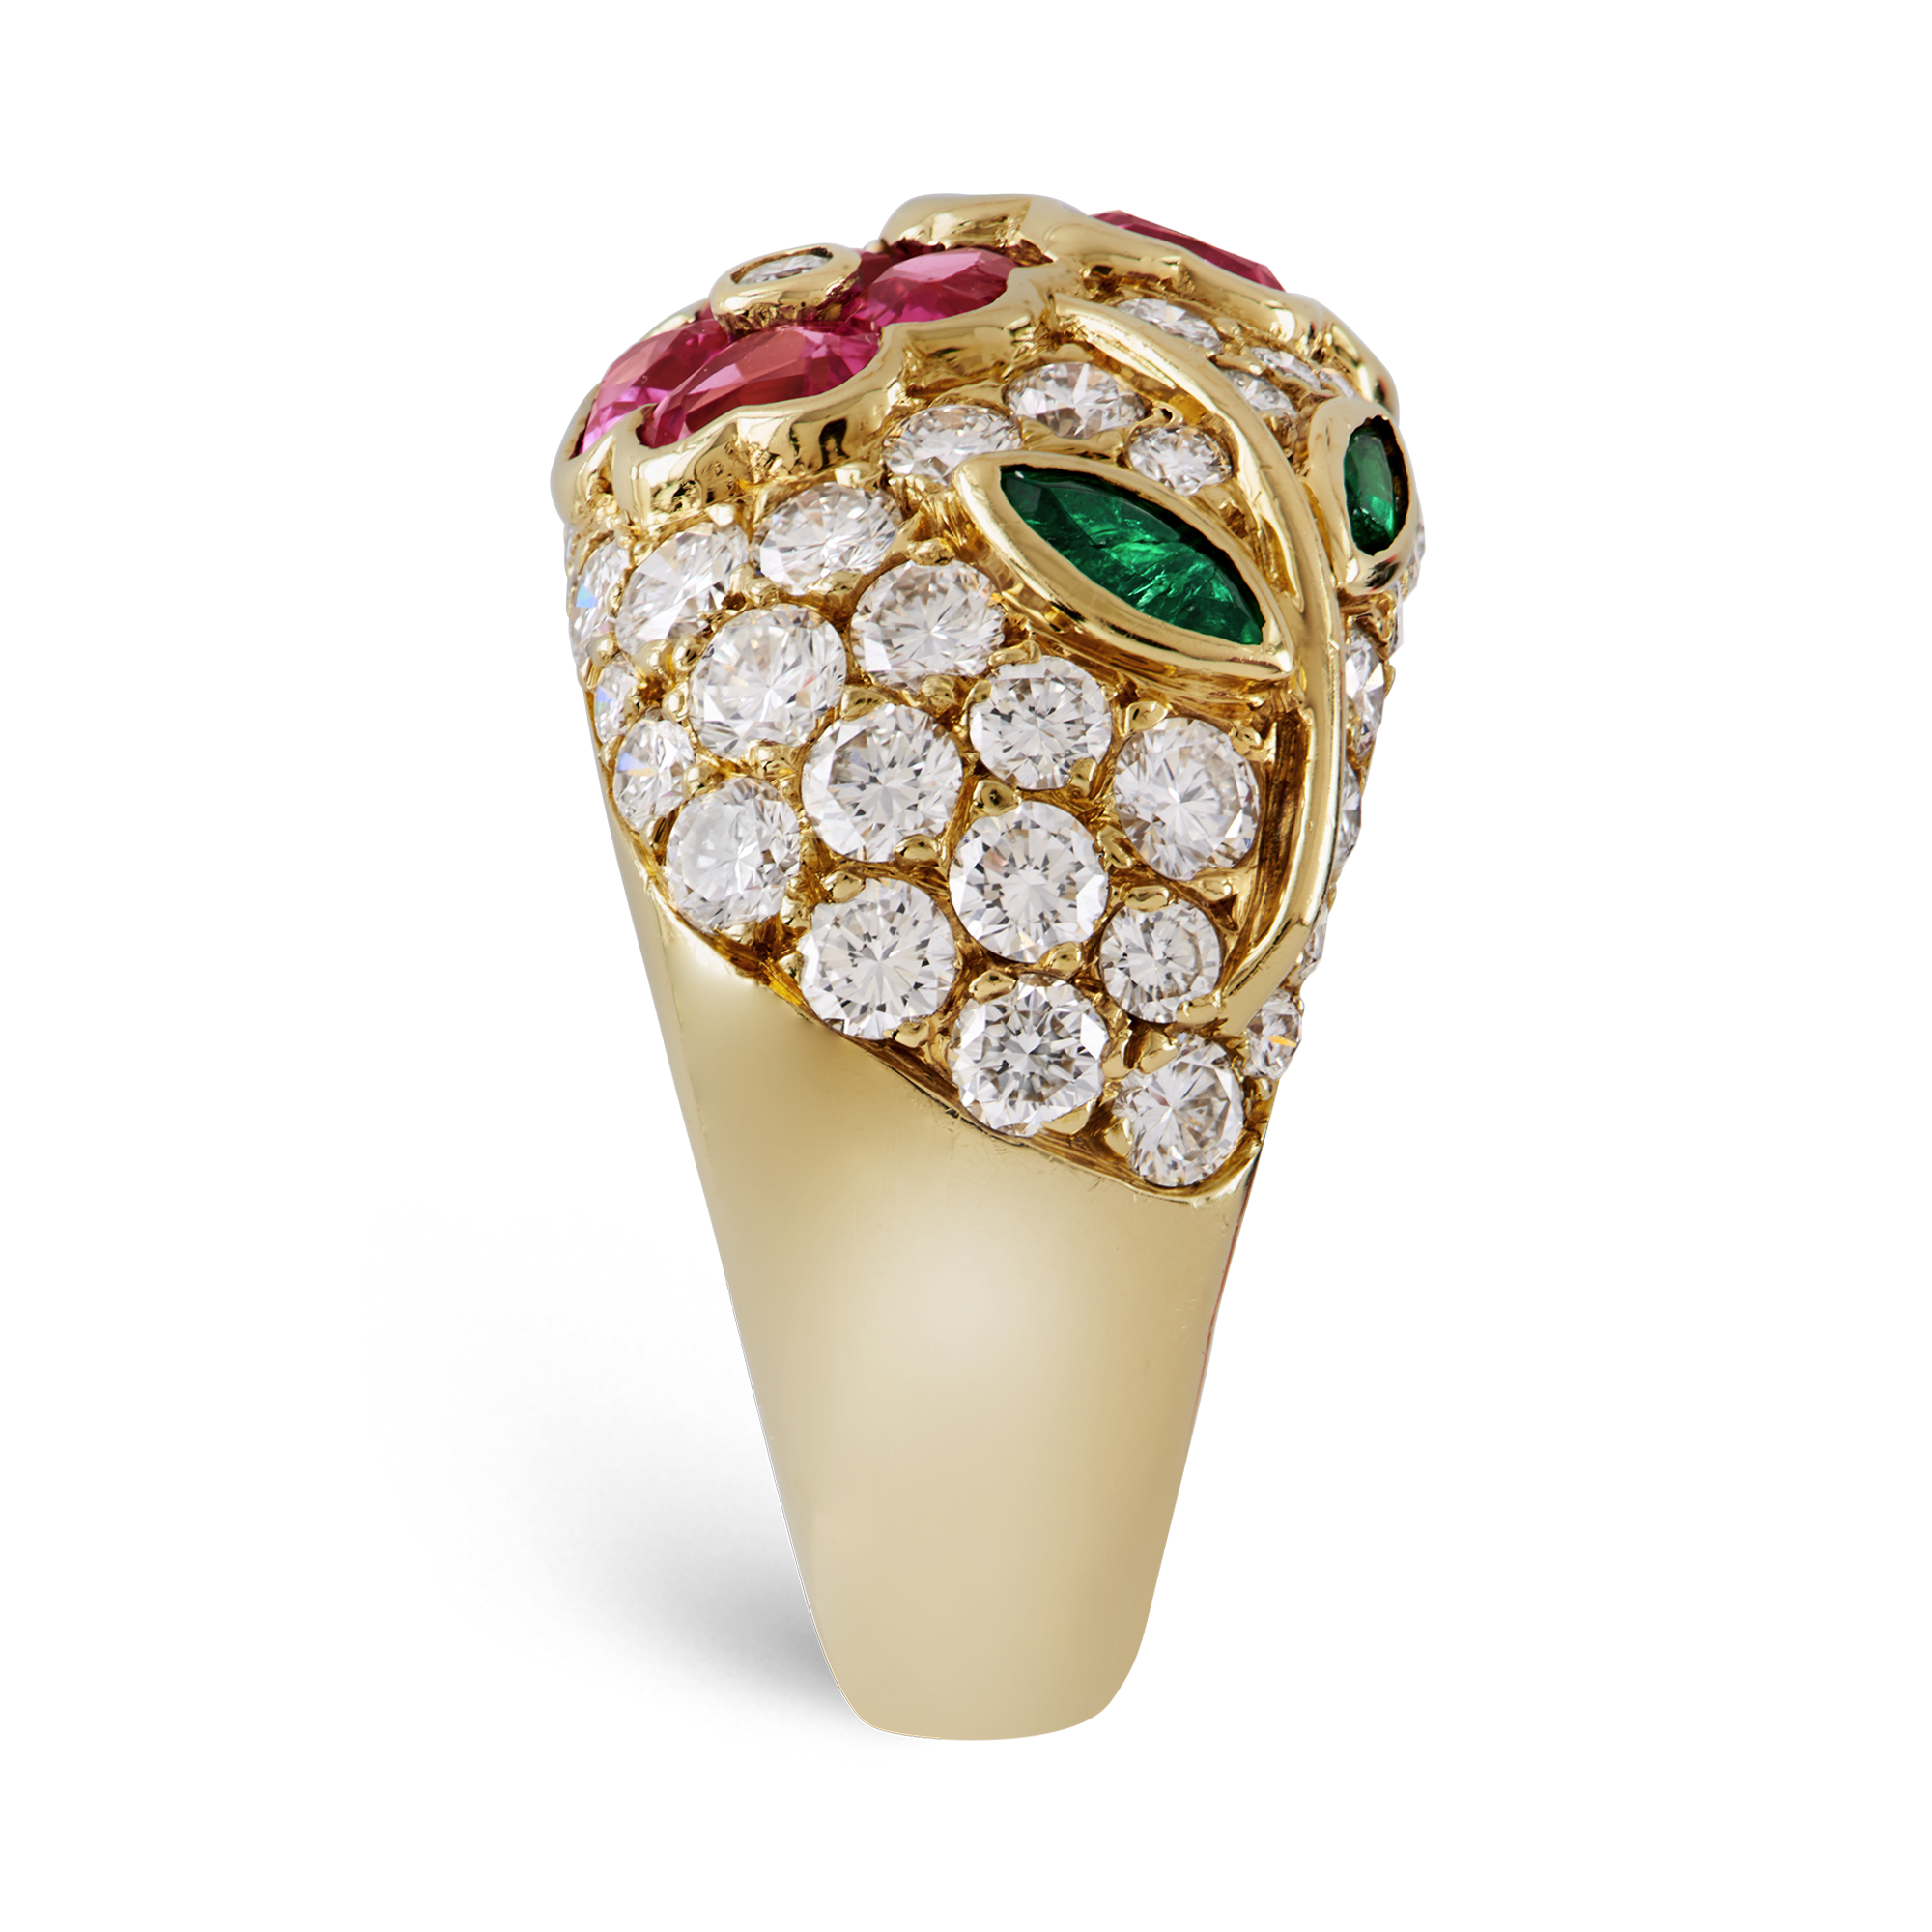 Contemporary Van Cleef & Arpels Floral Ring Cocktail Ring, with Diamond, Pink Sapphire & Emerald_4